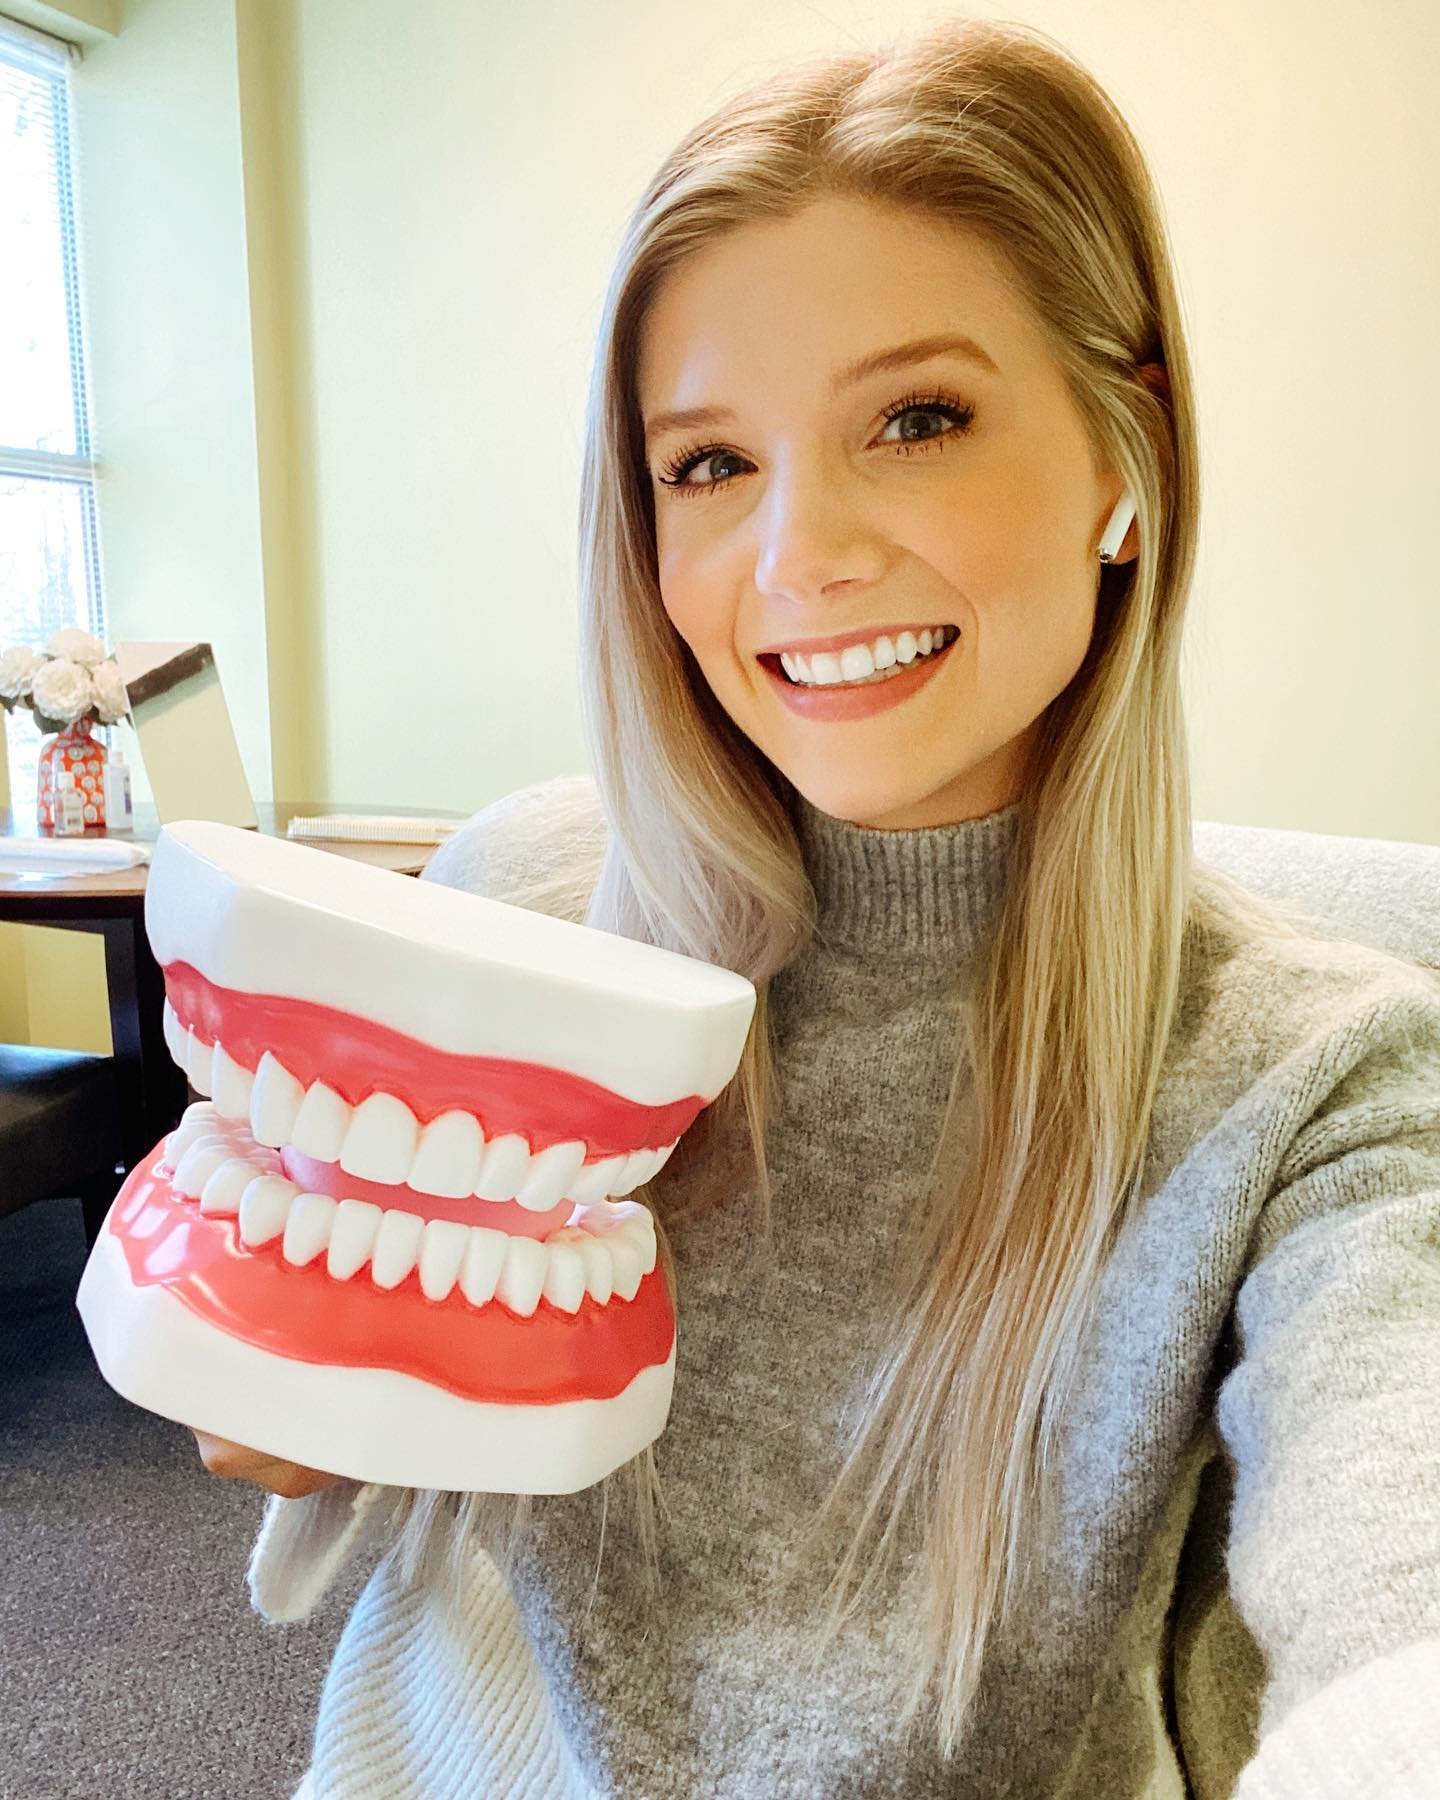 My articulation kids are loving my new speech assistant, Mr. Mouth! This particular model is currently unavailable on @amazon, but I found another similar option! Click the link below to get yours 👄
.
.
.
Link: https://www.amazon.com/Easyinsmile-6Ti